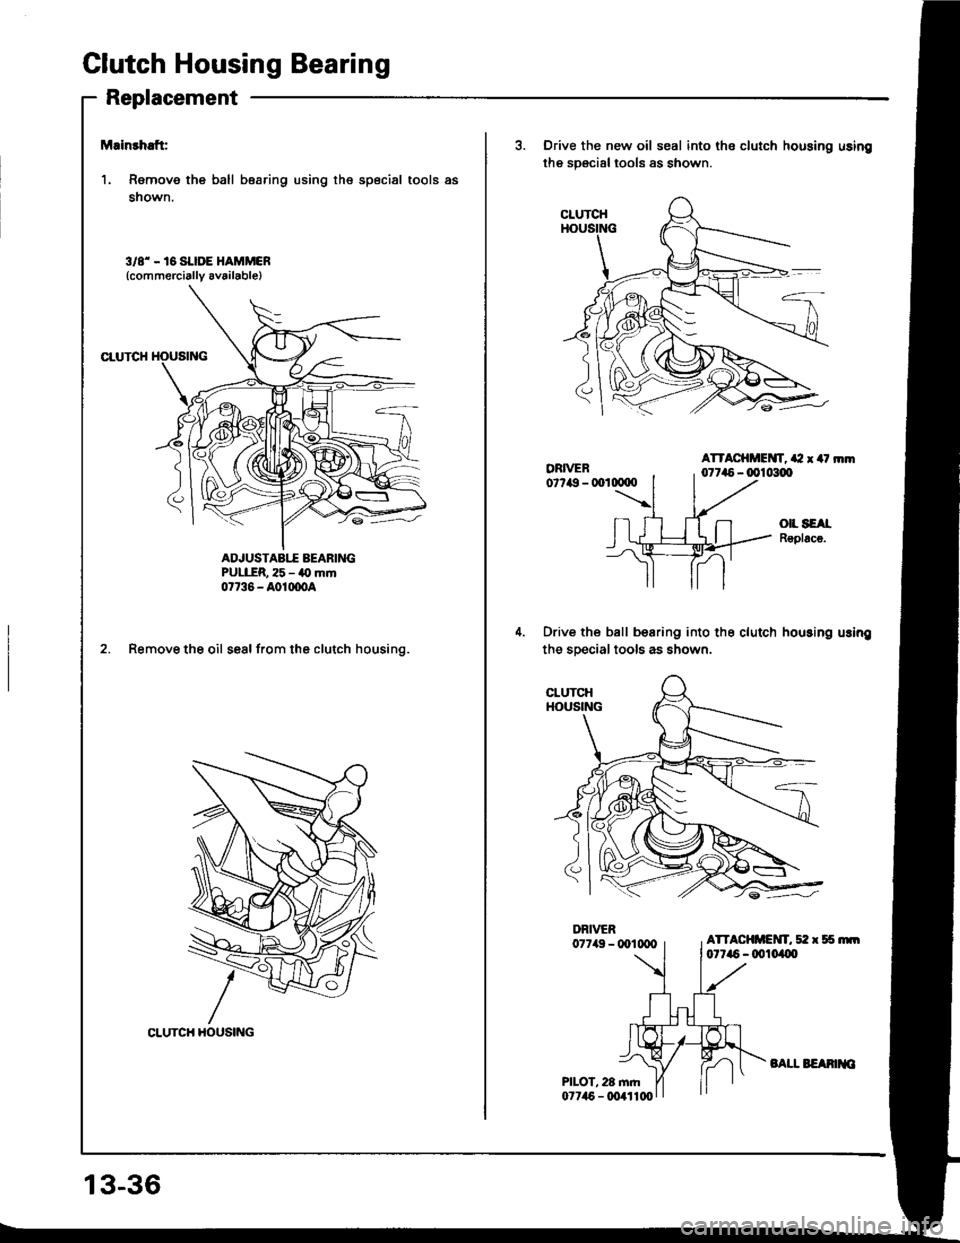 ACURA INTEGRA 1994  Service User Guide Clutch Housing Bearing
Replacement
Mainrhaft:
1. Remove the ball bearing using the special tools as
shown.
3/8 - 16 SI.IDE HAMMCR(commercially av6ilable)
CTUTCH
ADJUSTABIT AEARINGPULER, 25 - a0 mrn07